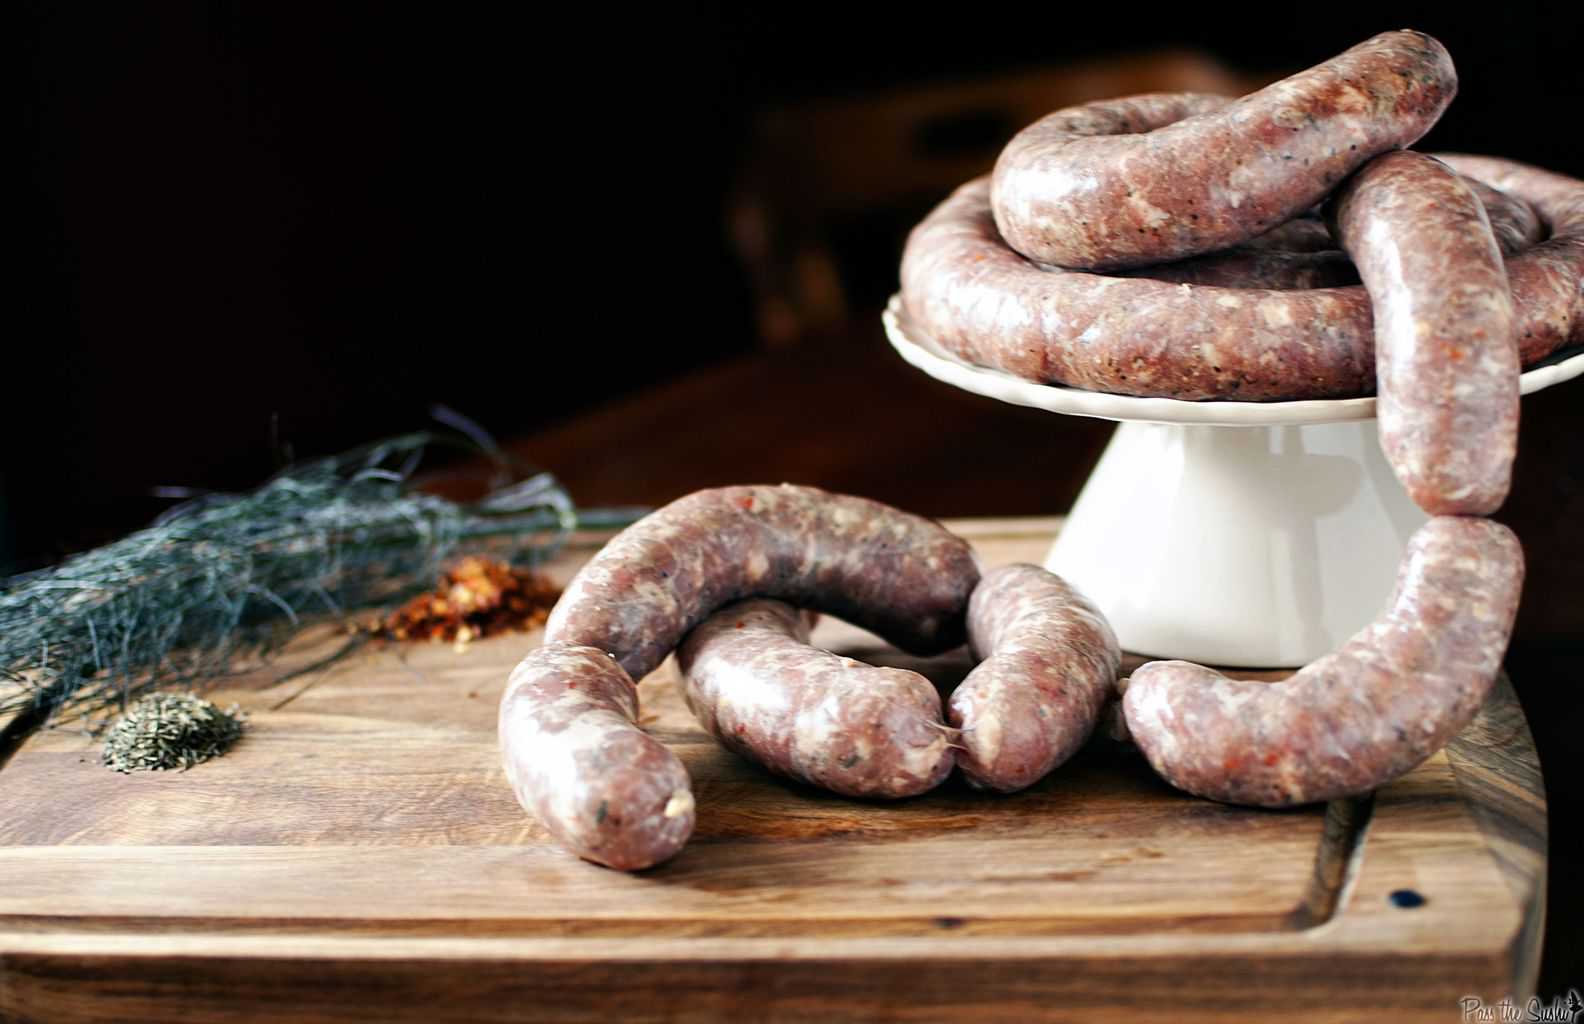 Learn how to make spicy Italian sausage from scratch! From grinding and flavoring the meat to filling and cooking the casings, this post will show you how!